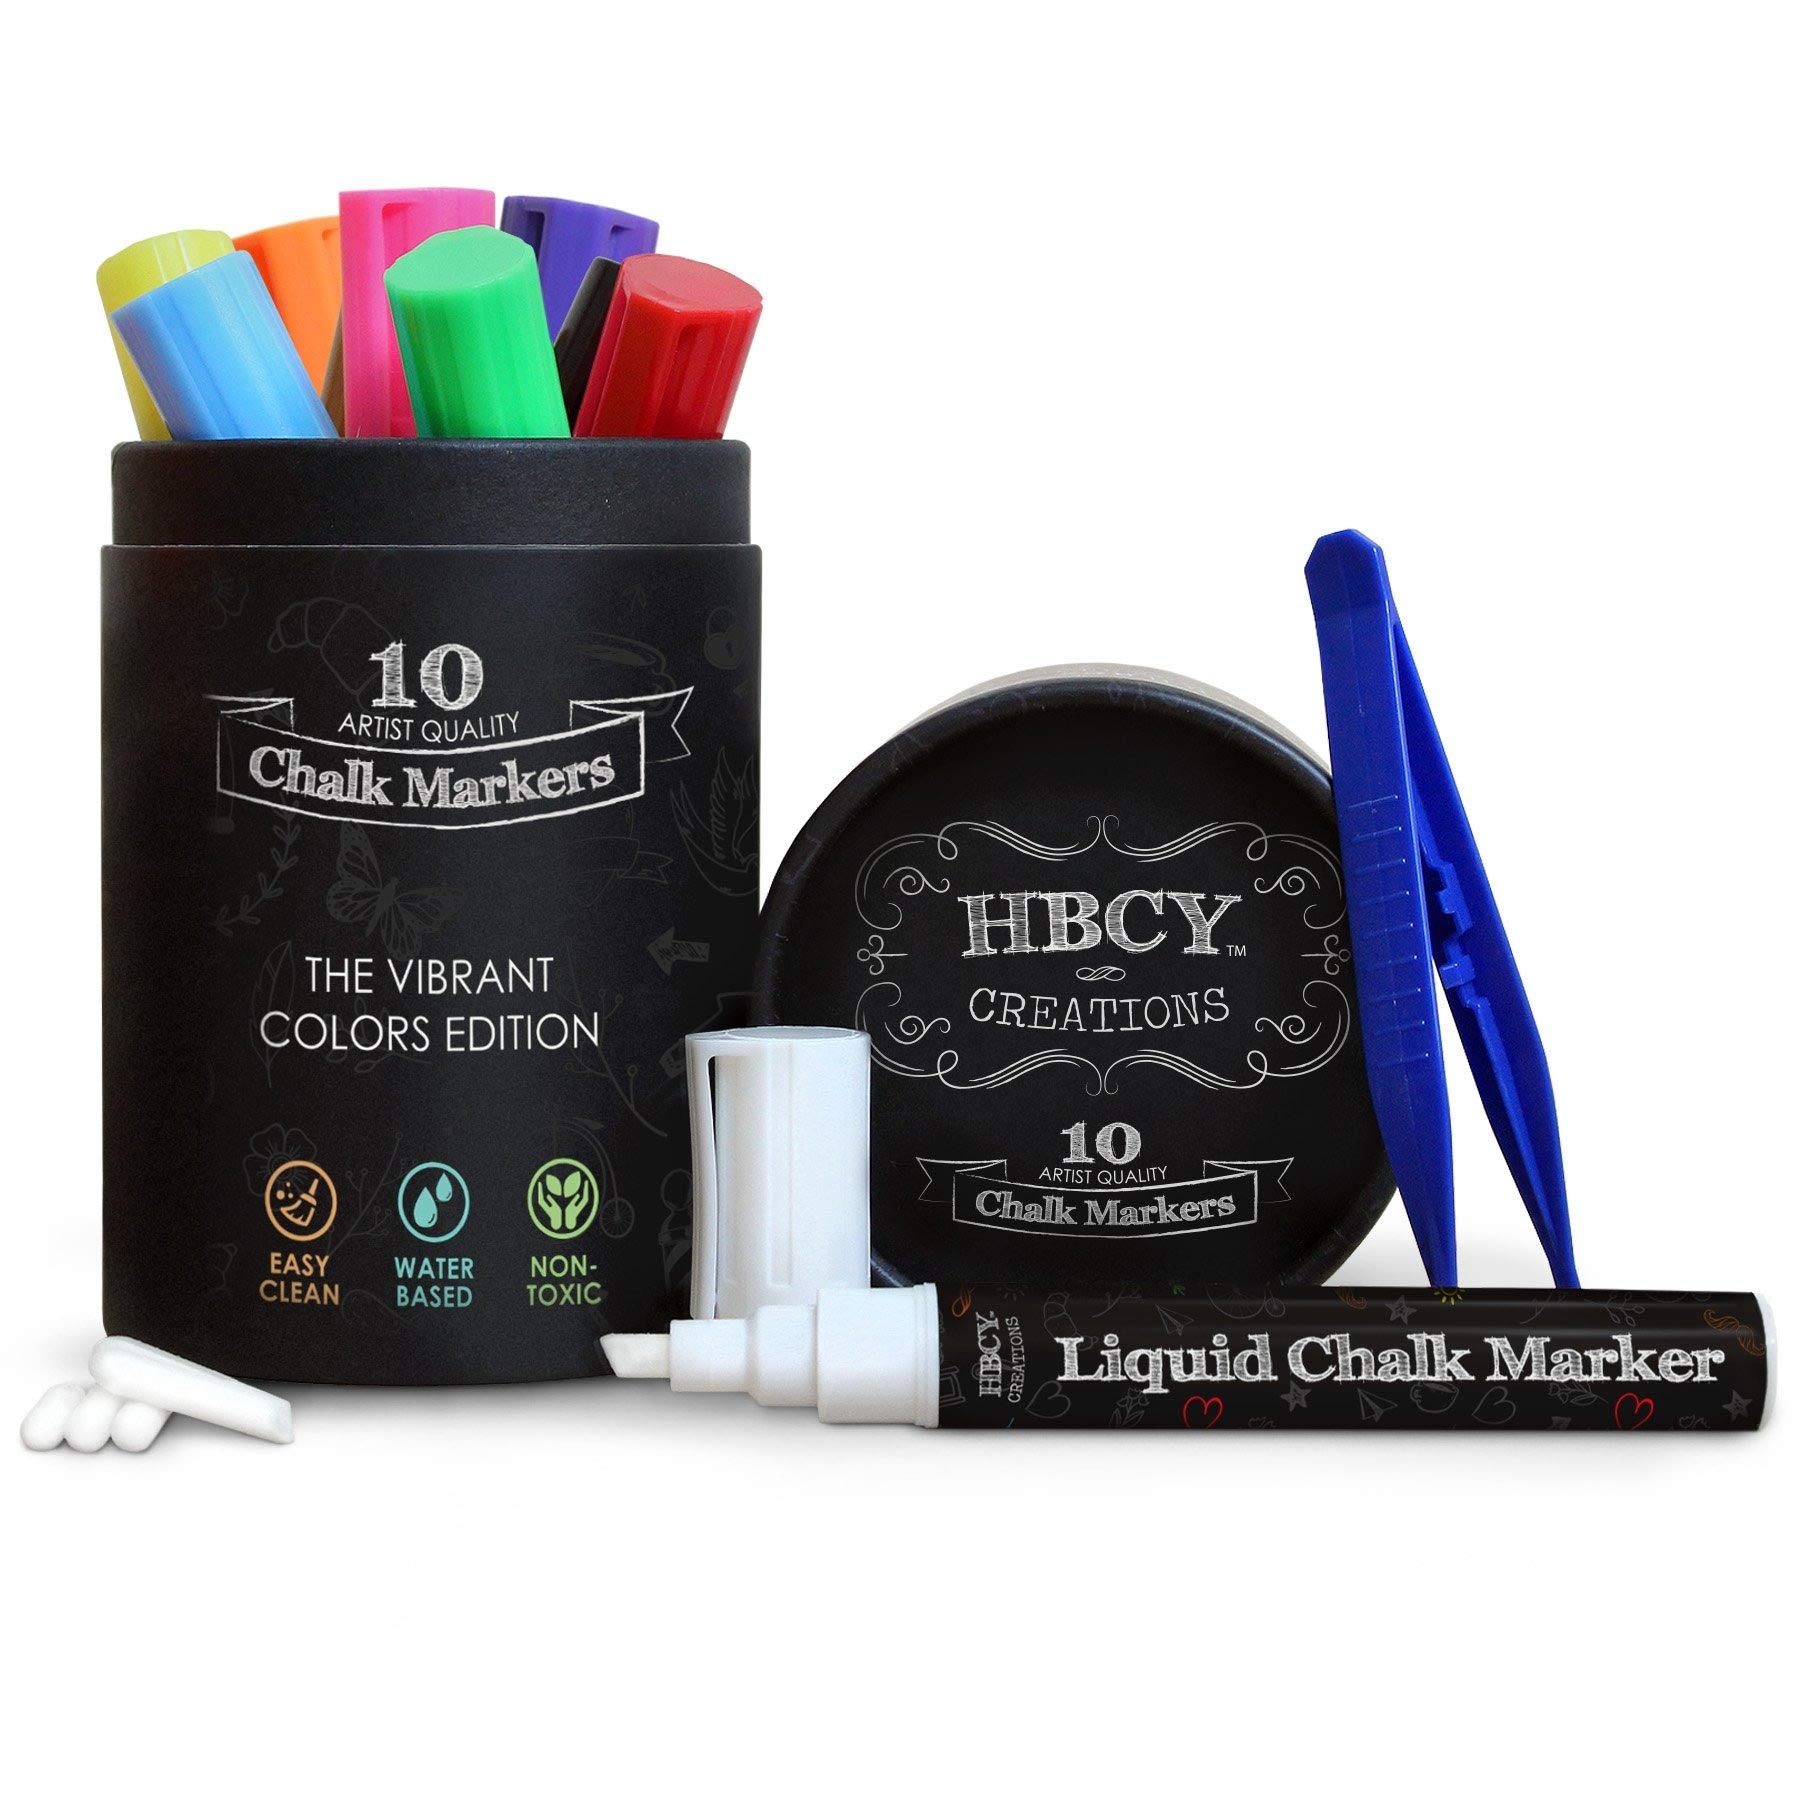 Book Cover HBCY Creations Liquid Chalk Markers Set - 10 Neon Colored Non-Toxic Erasable Chalkboard Markers - For Chalk Boards, Glass, Labels & More! 5 Extra Chisel & Bullet Tips, Tweezers & Chalk Pen Holder!